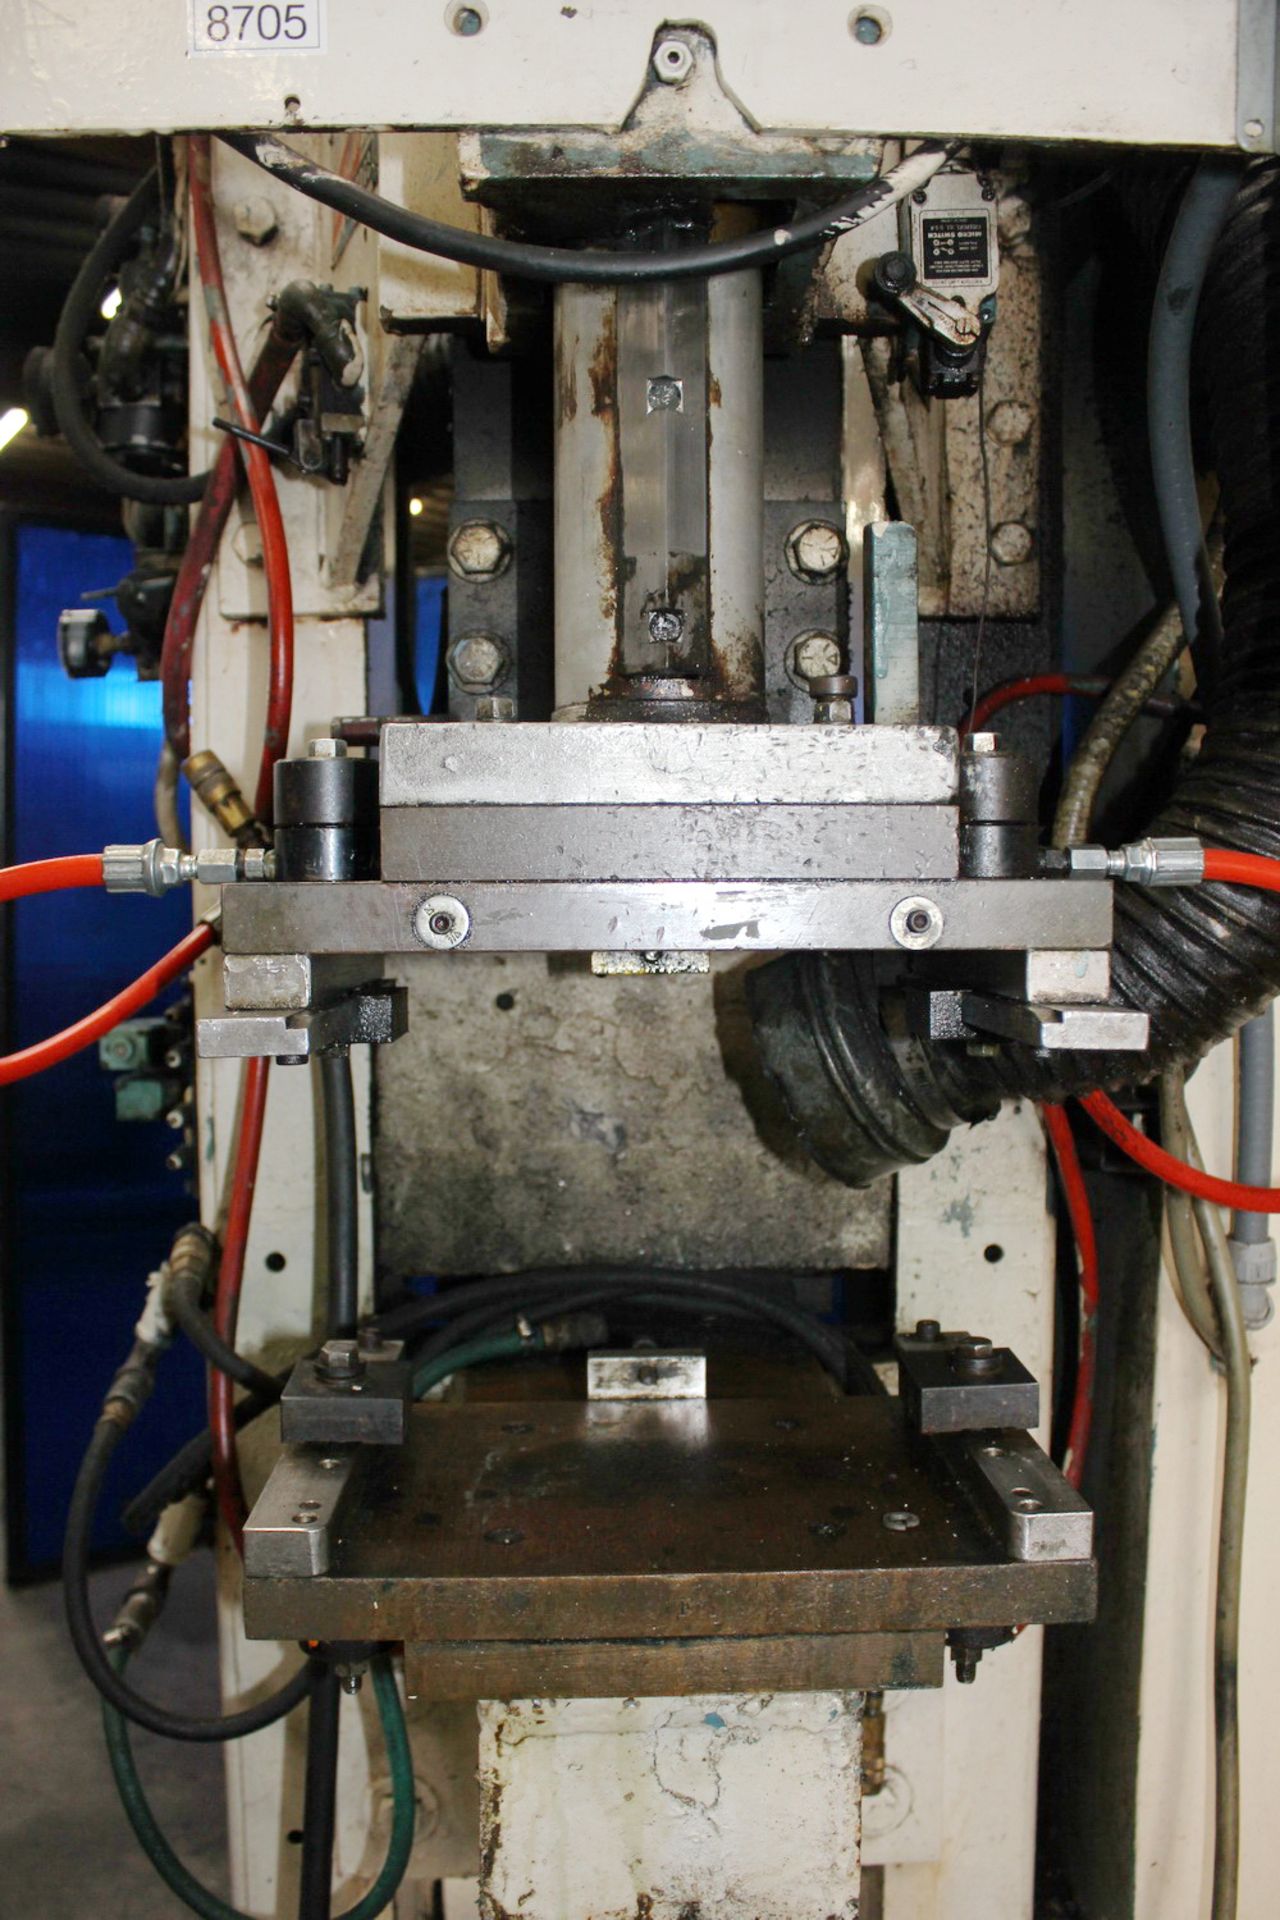 Hoffman Press Type Spot Welder 125 KVA x 14''. LOADING FEE FOR THIS LOT: $150 - Image 10 of 18